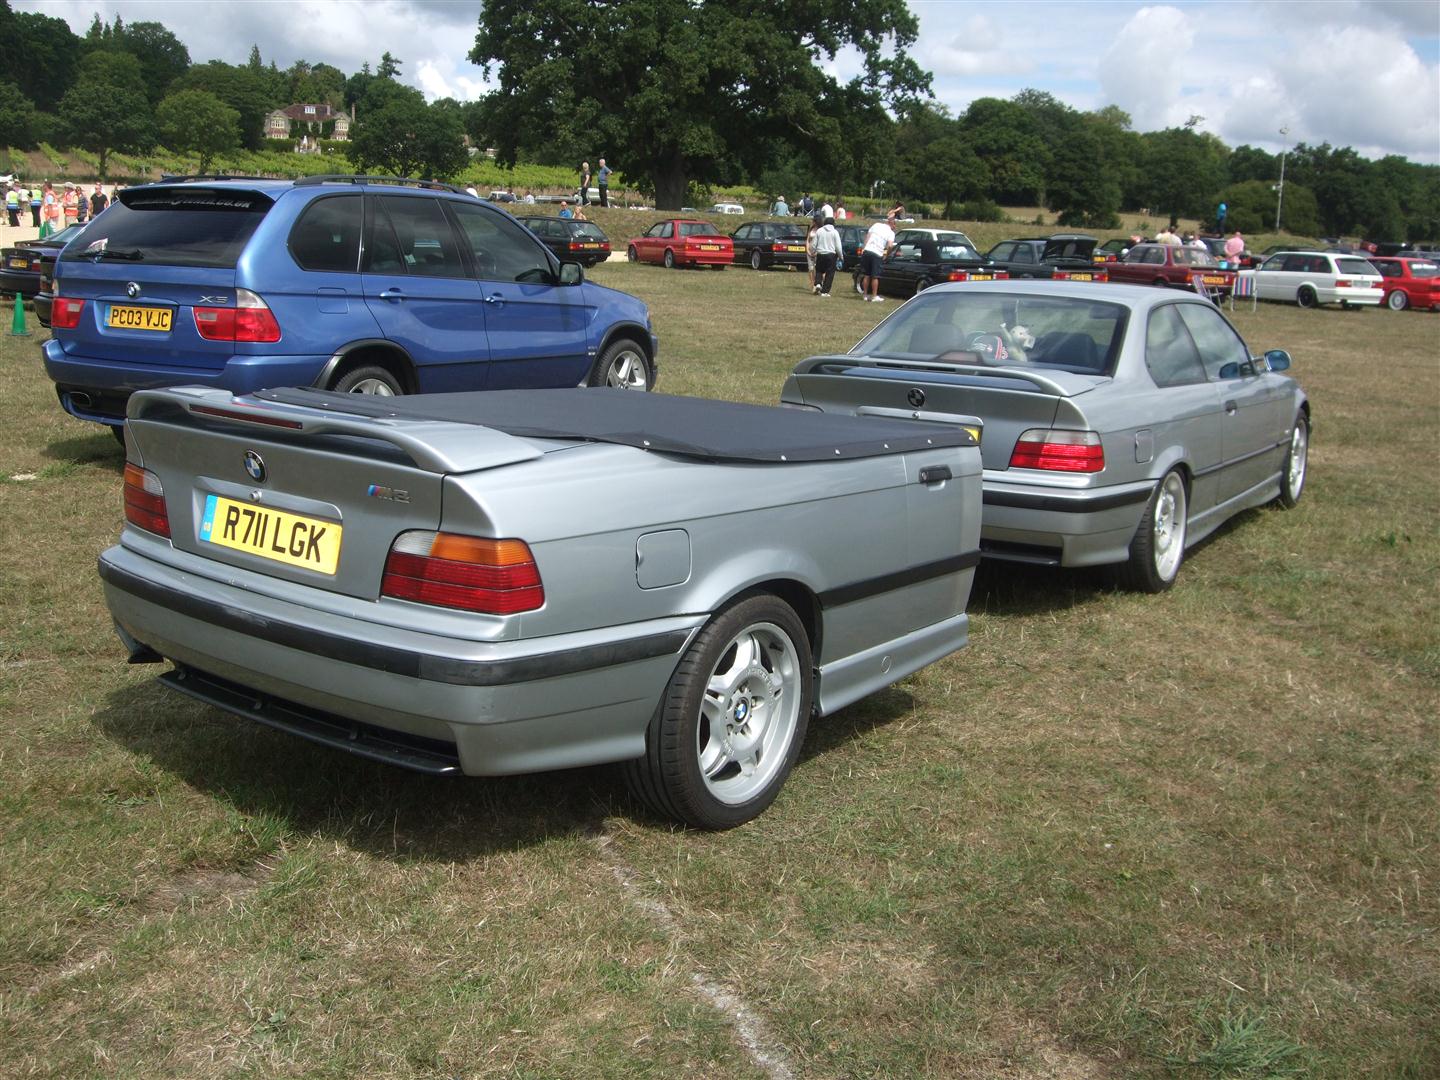 1997 BMW 3 series with trailer | Flickr - Photo Sharing!